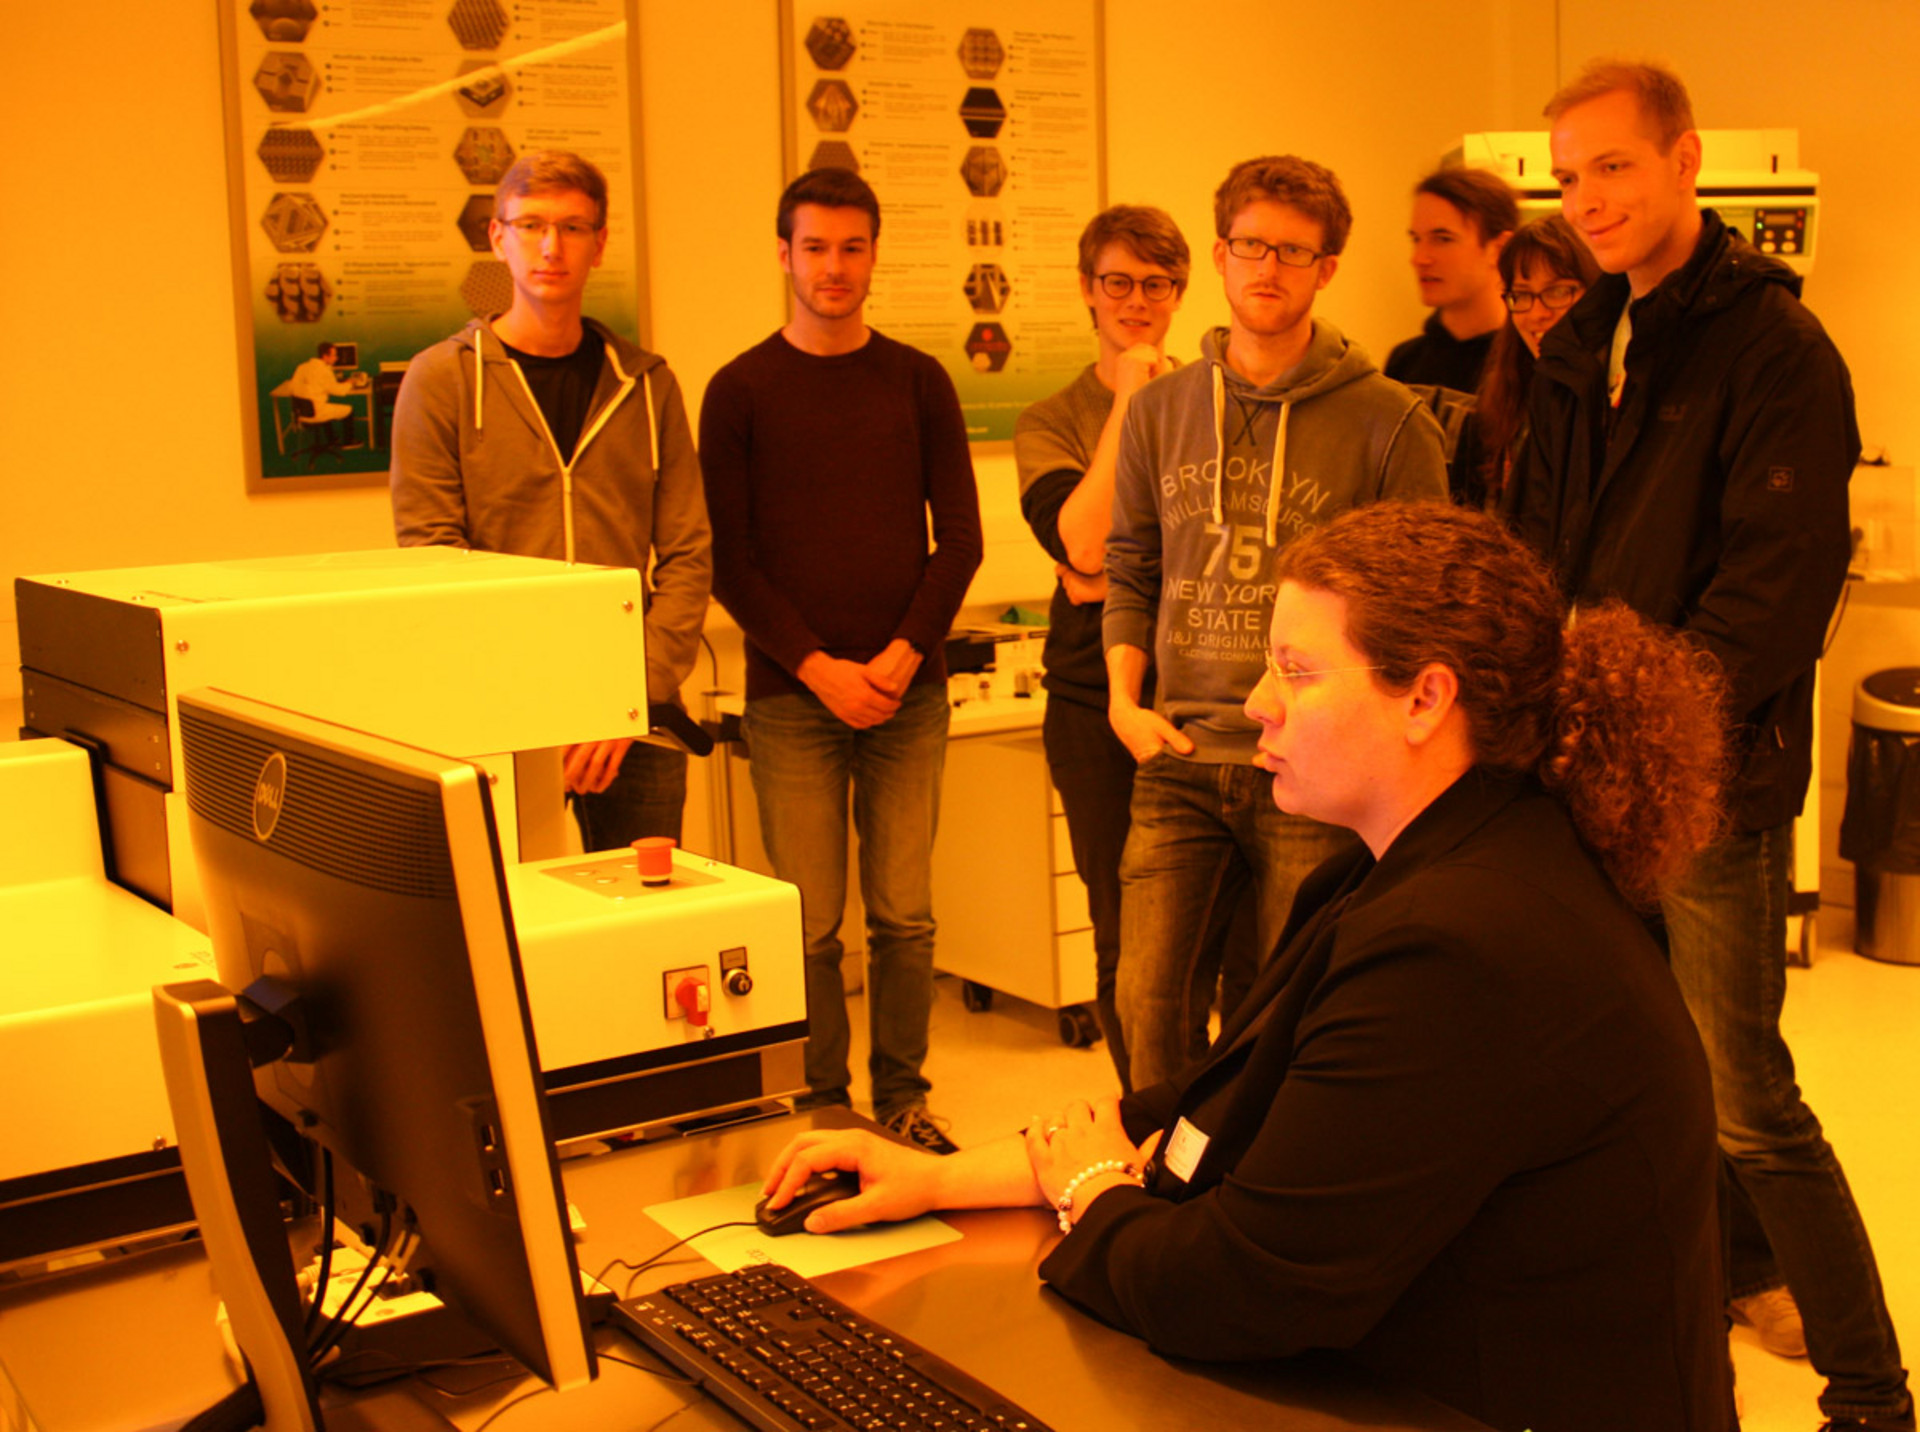 Live demonstration of the 3D printing of microstructures with the Photonic Professional GT2.